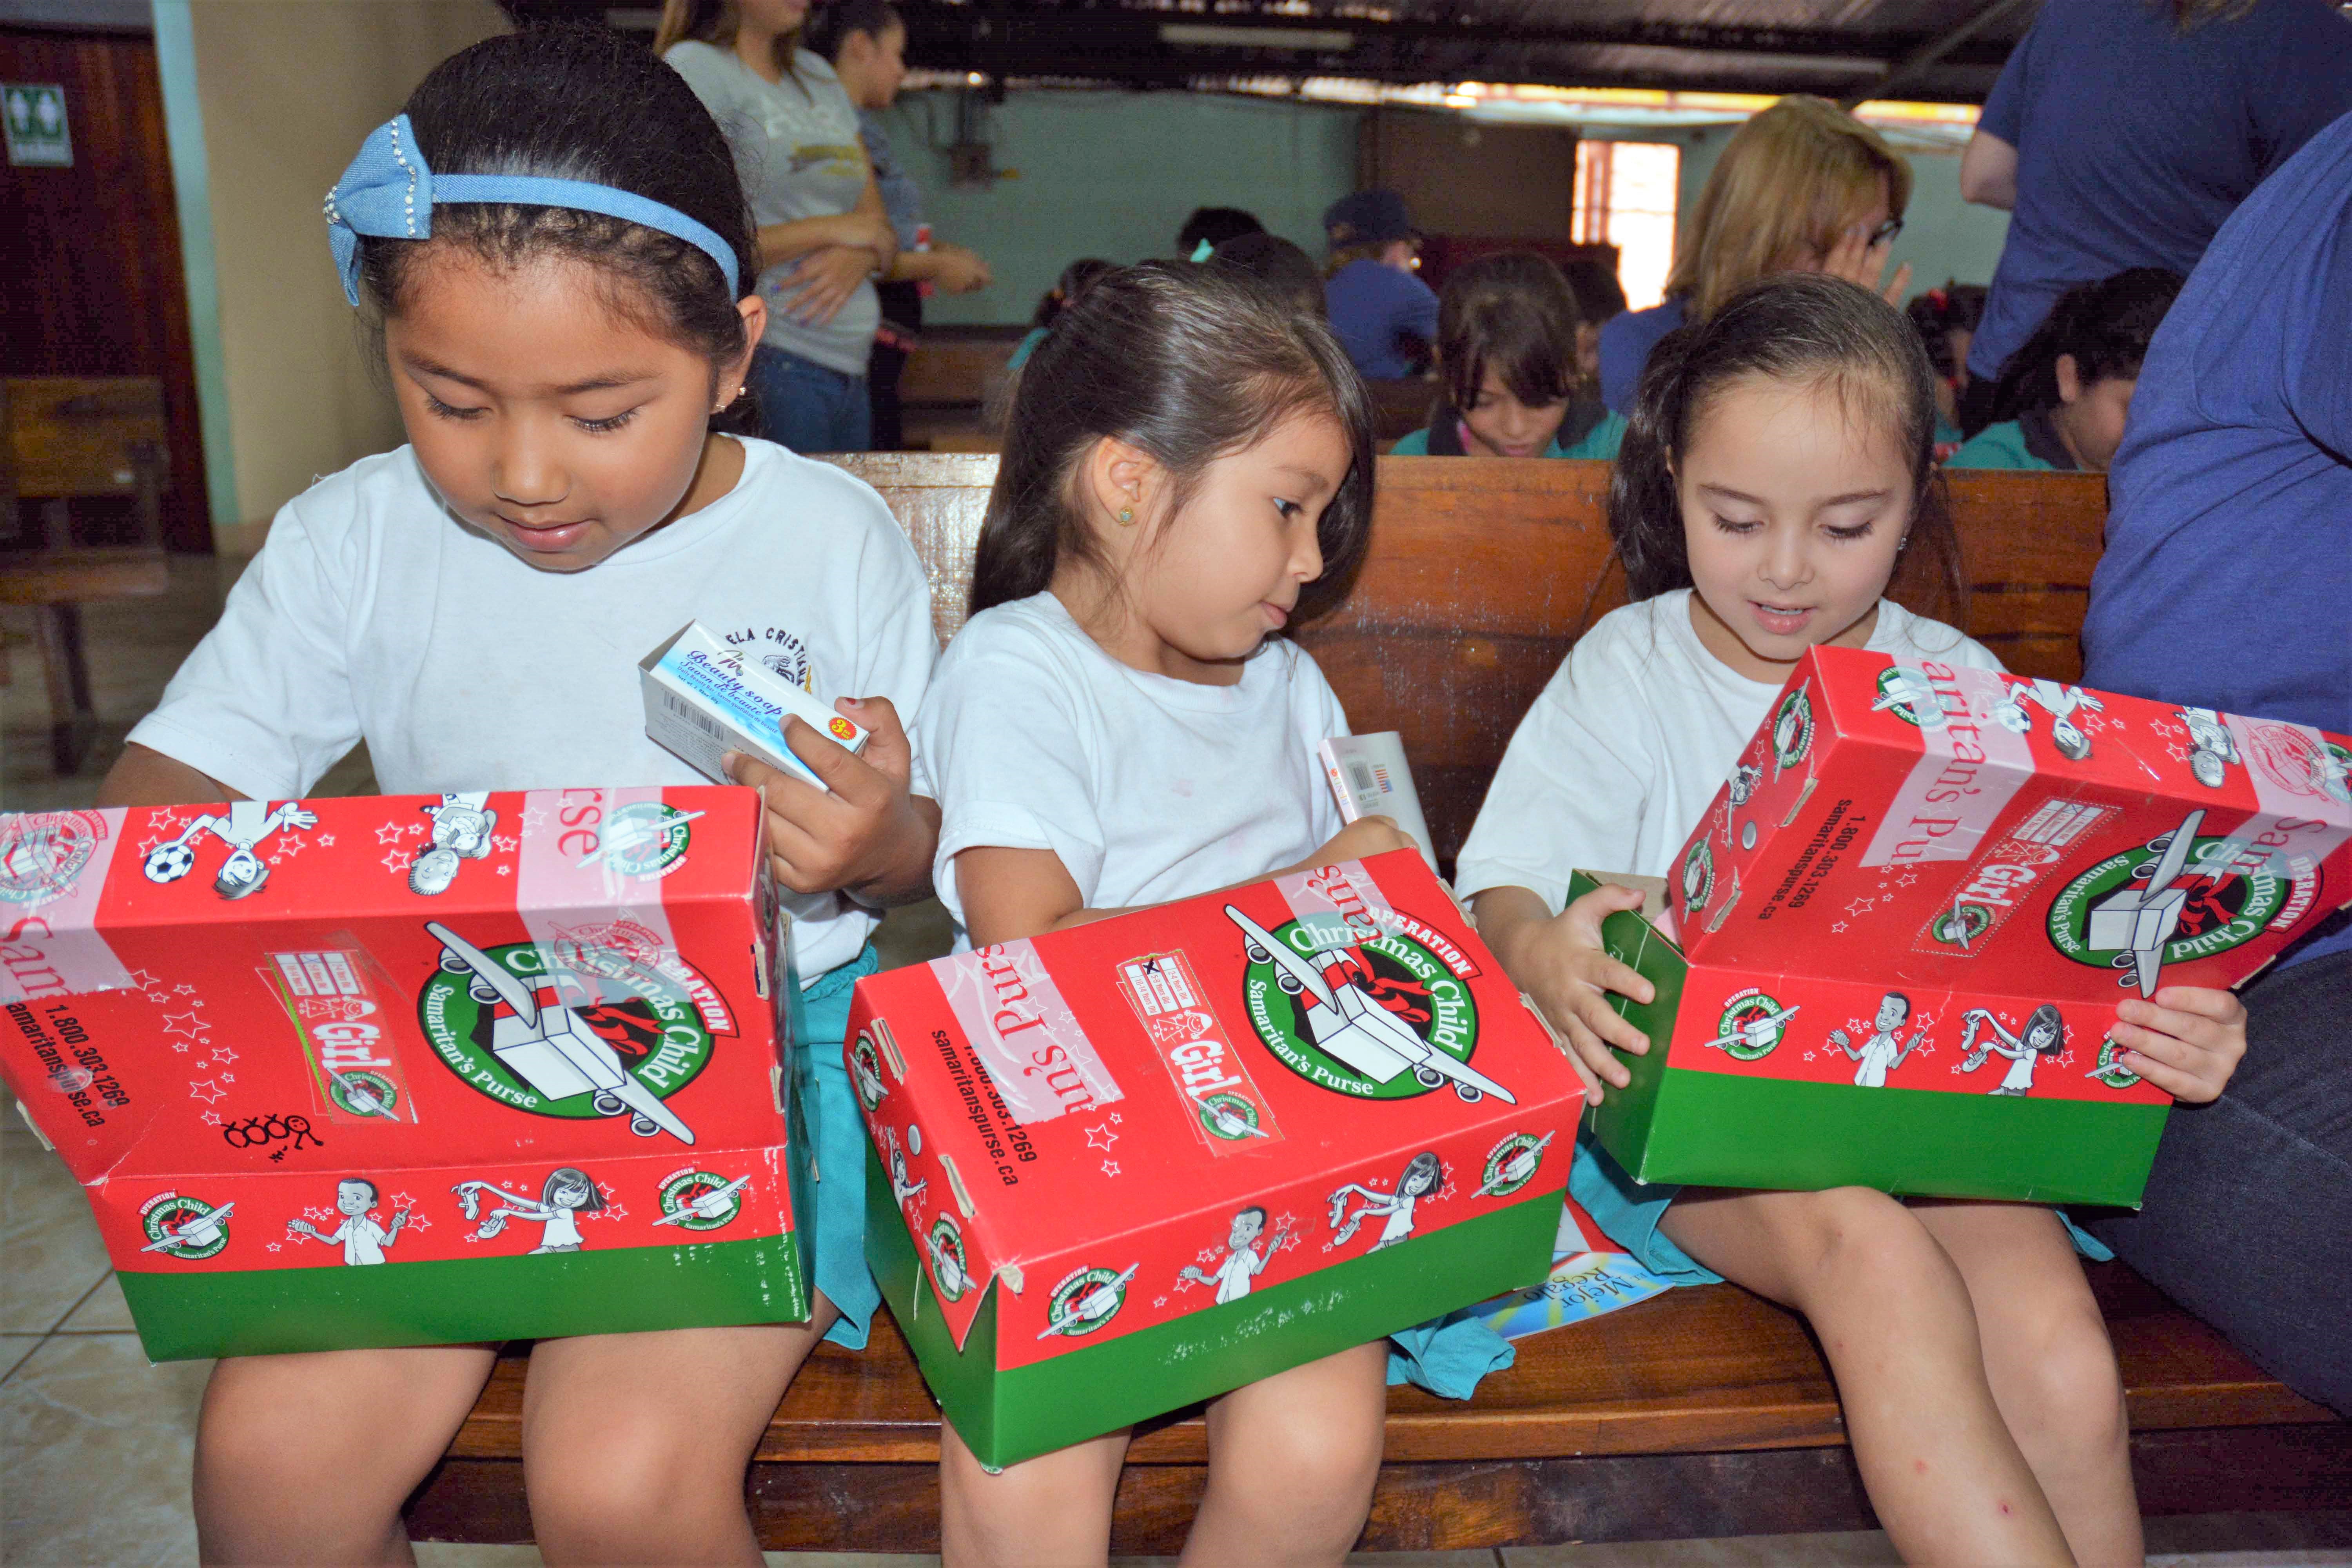 Operation Christmas Child collecting gift-filled shoeboxes this week